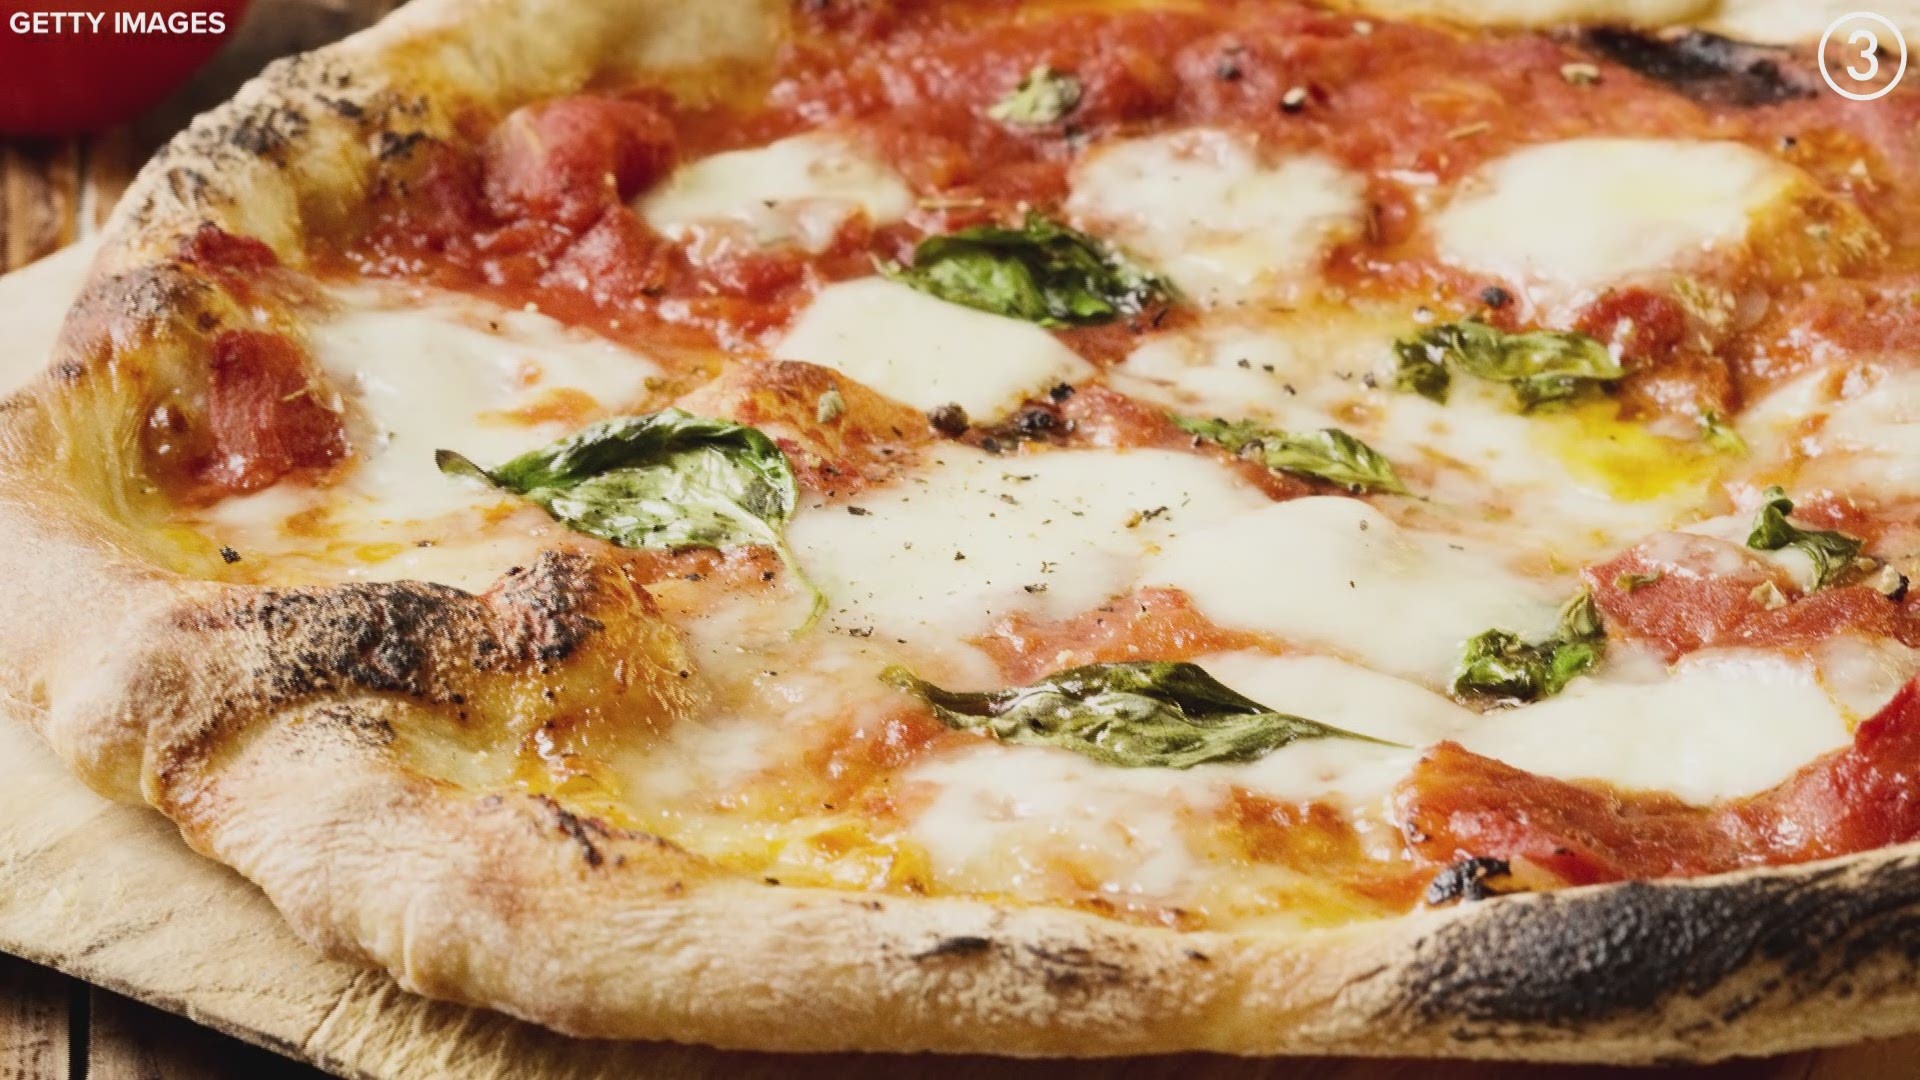 Here's your chance to find your new favorite pizza joint.